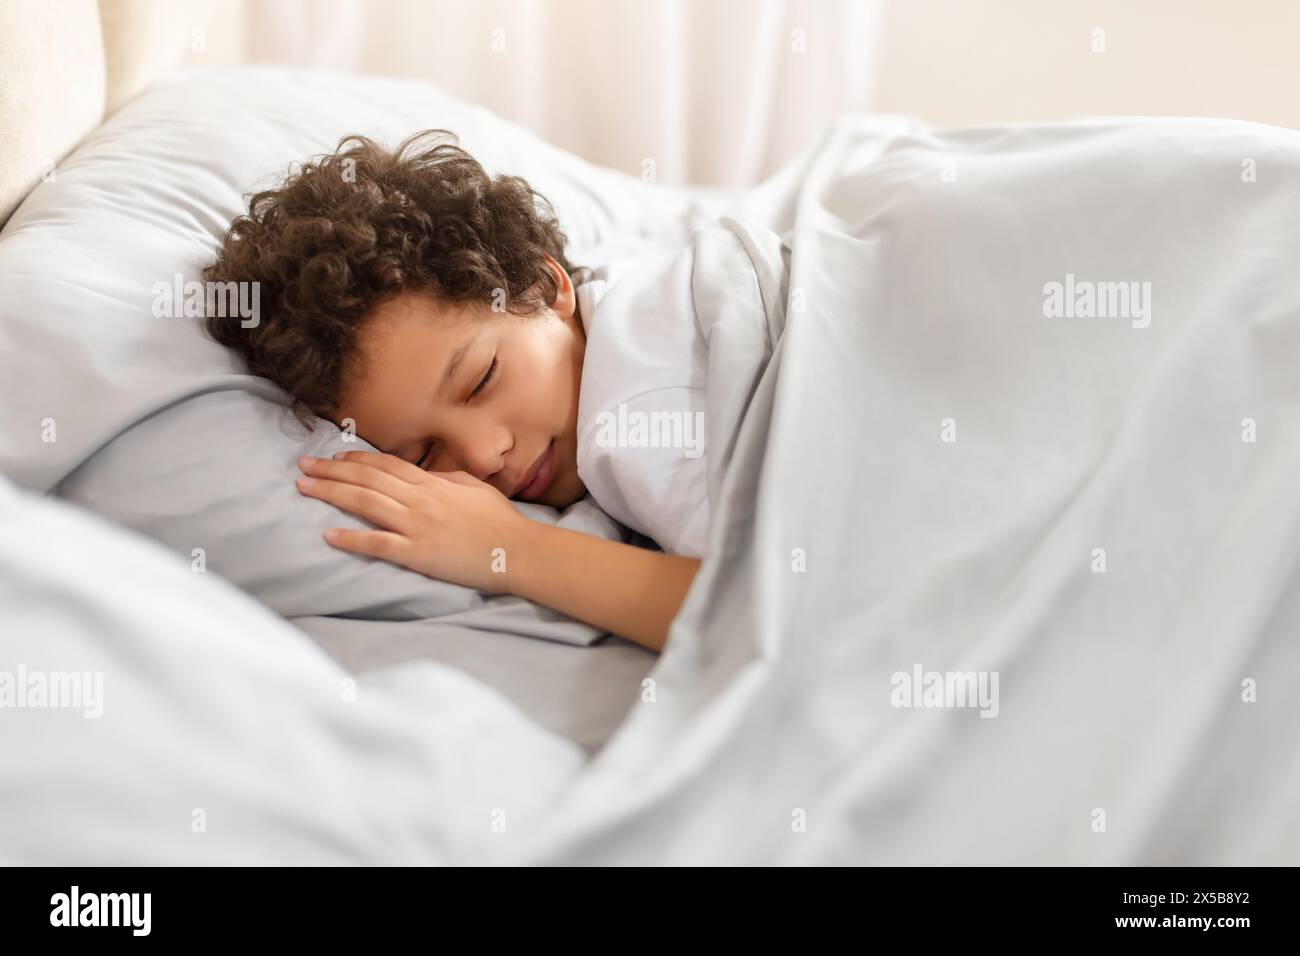 Young Boy Sleeping in Bed With White Sheets Stock Photo